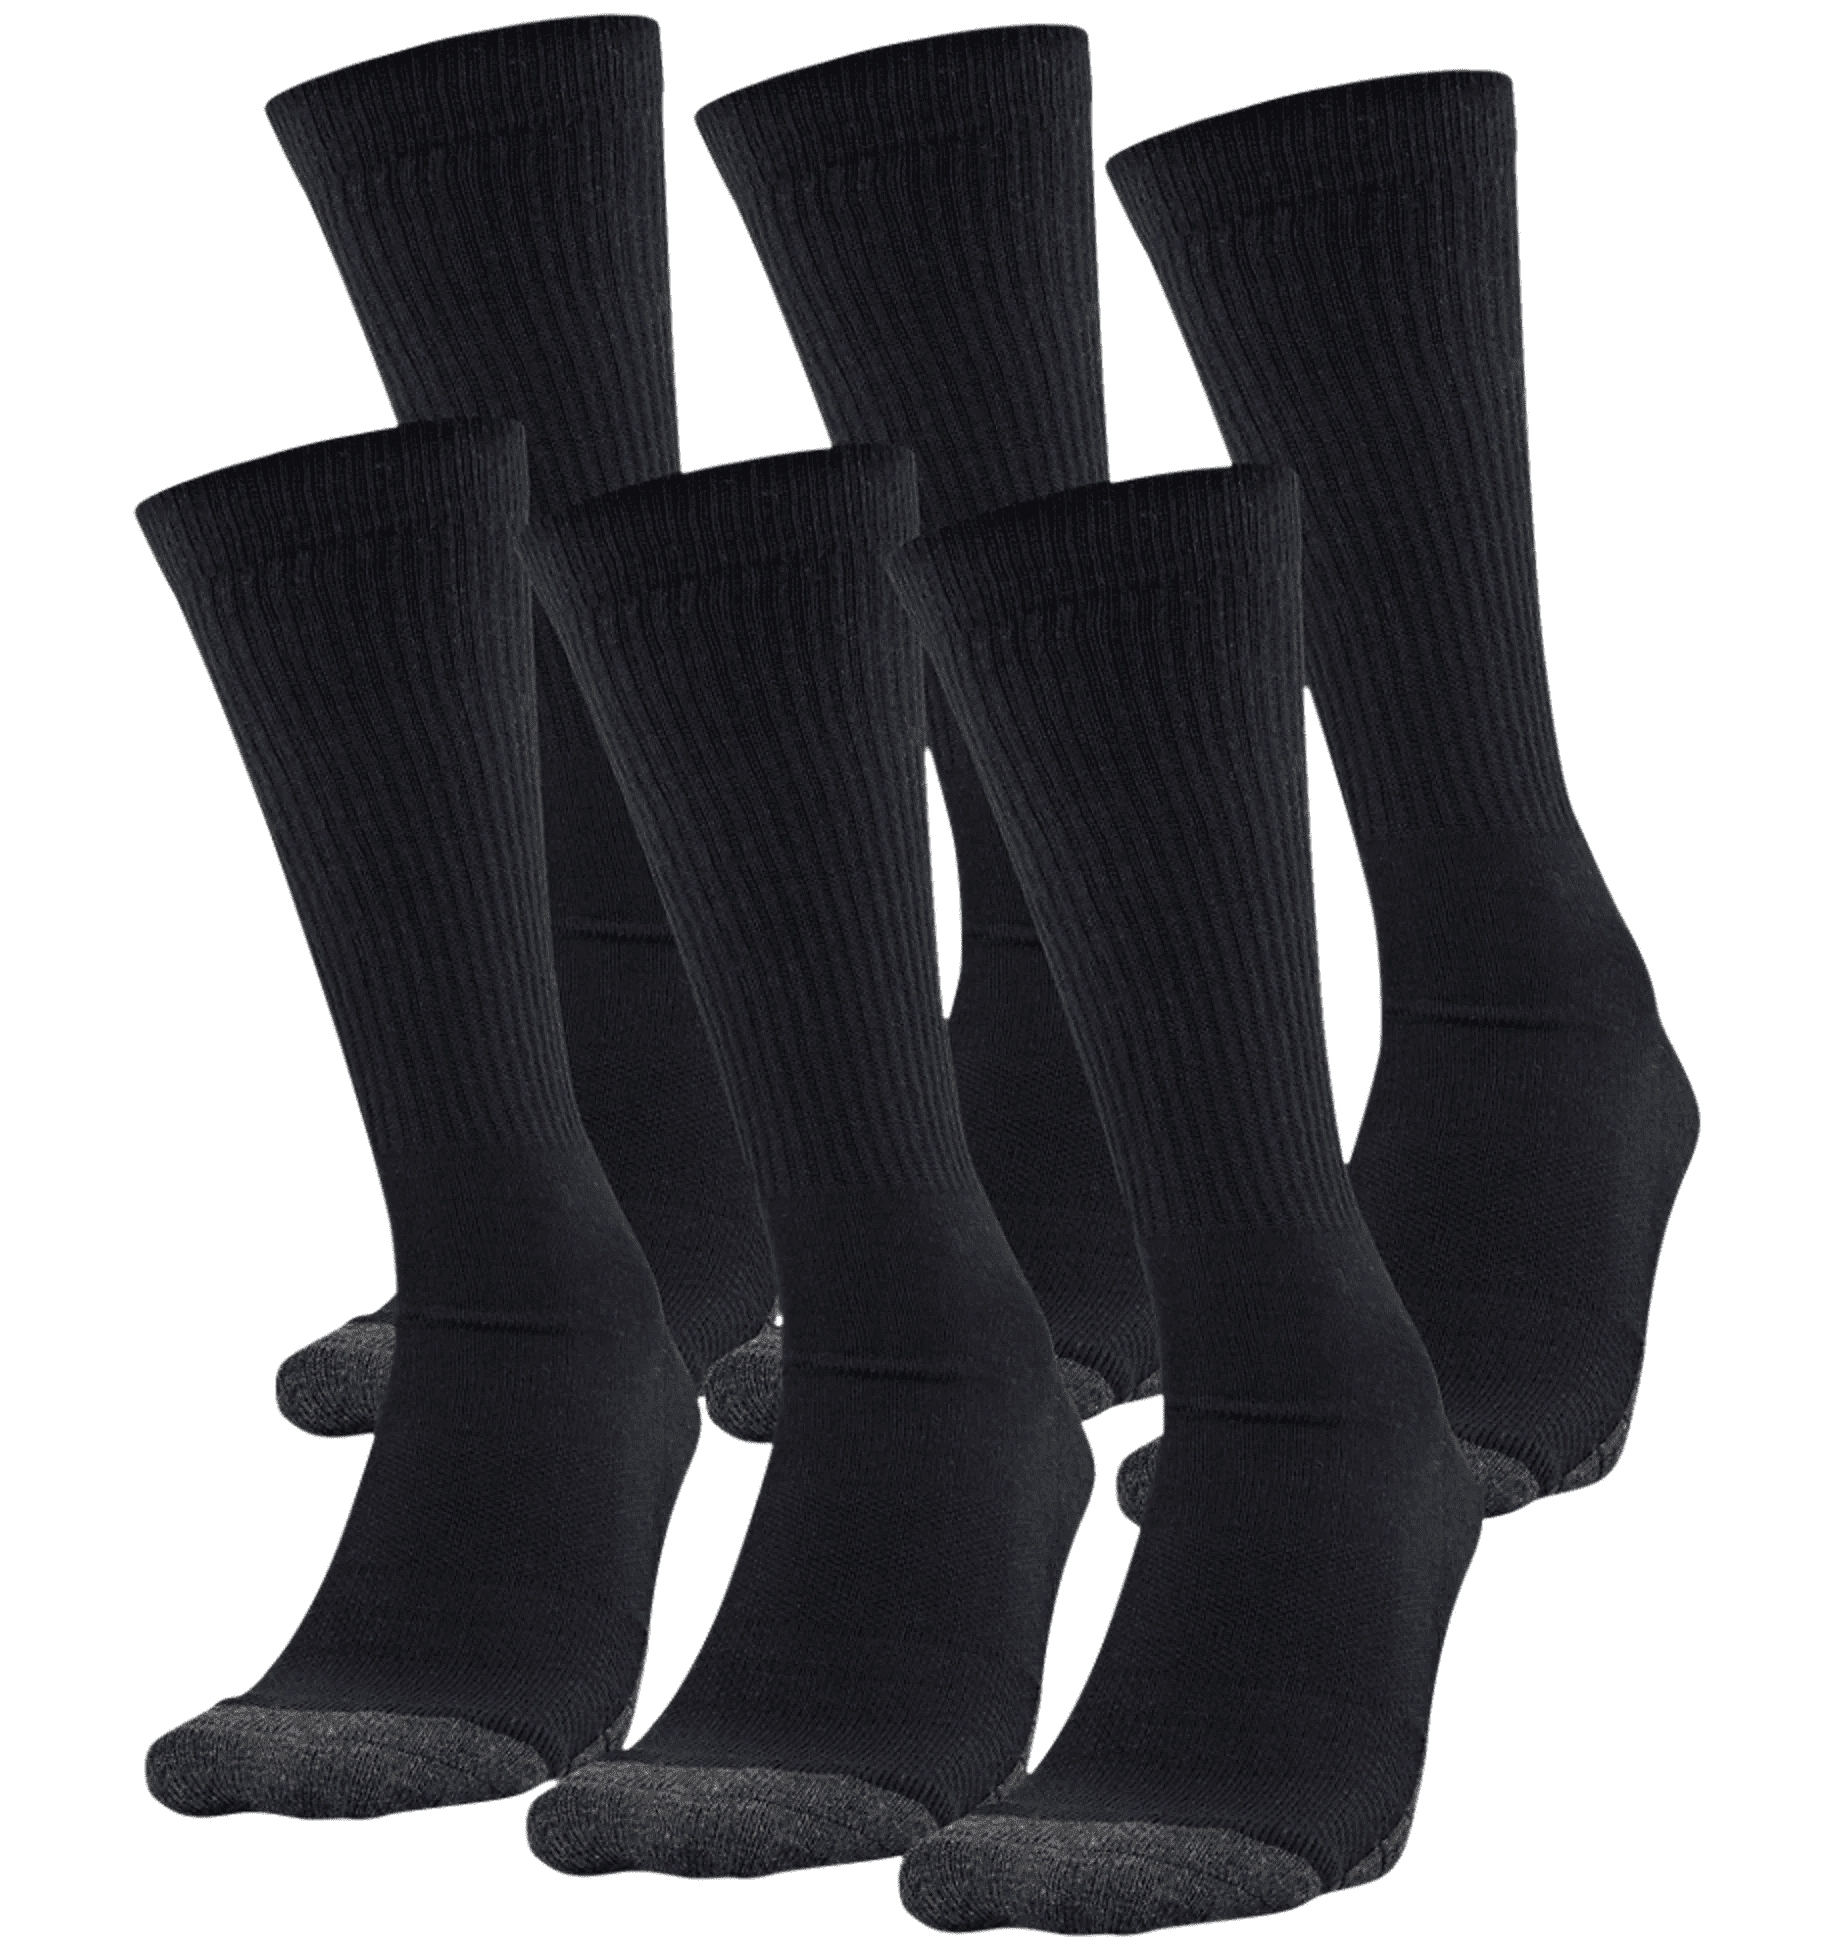 Under Armour Unisex UA Performance Tech Crew 6-Pack Socks - Clothing & Accessories